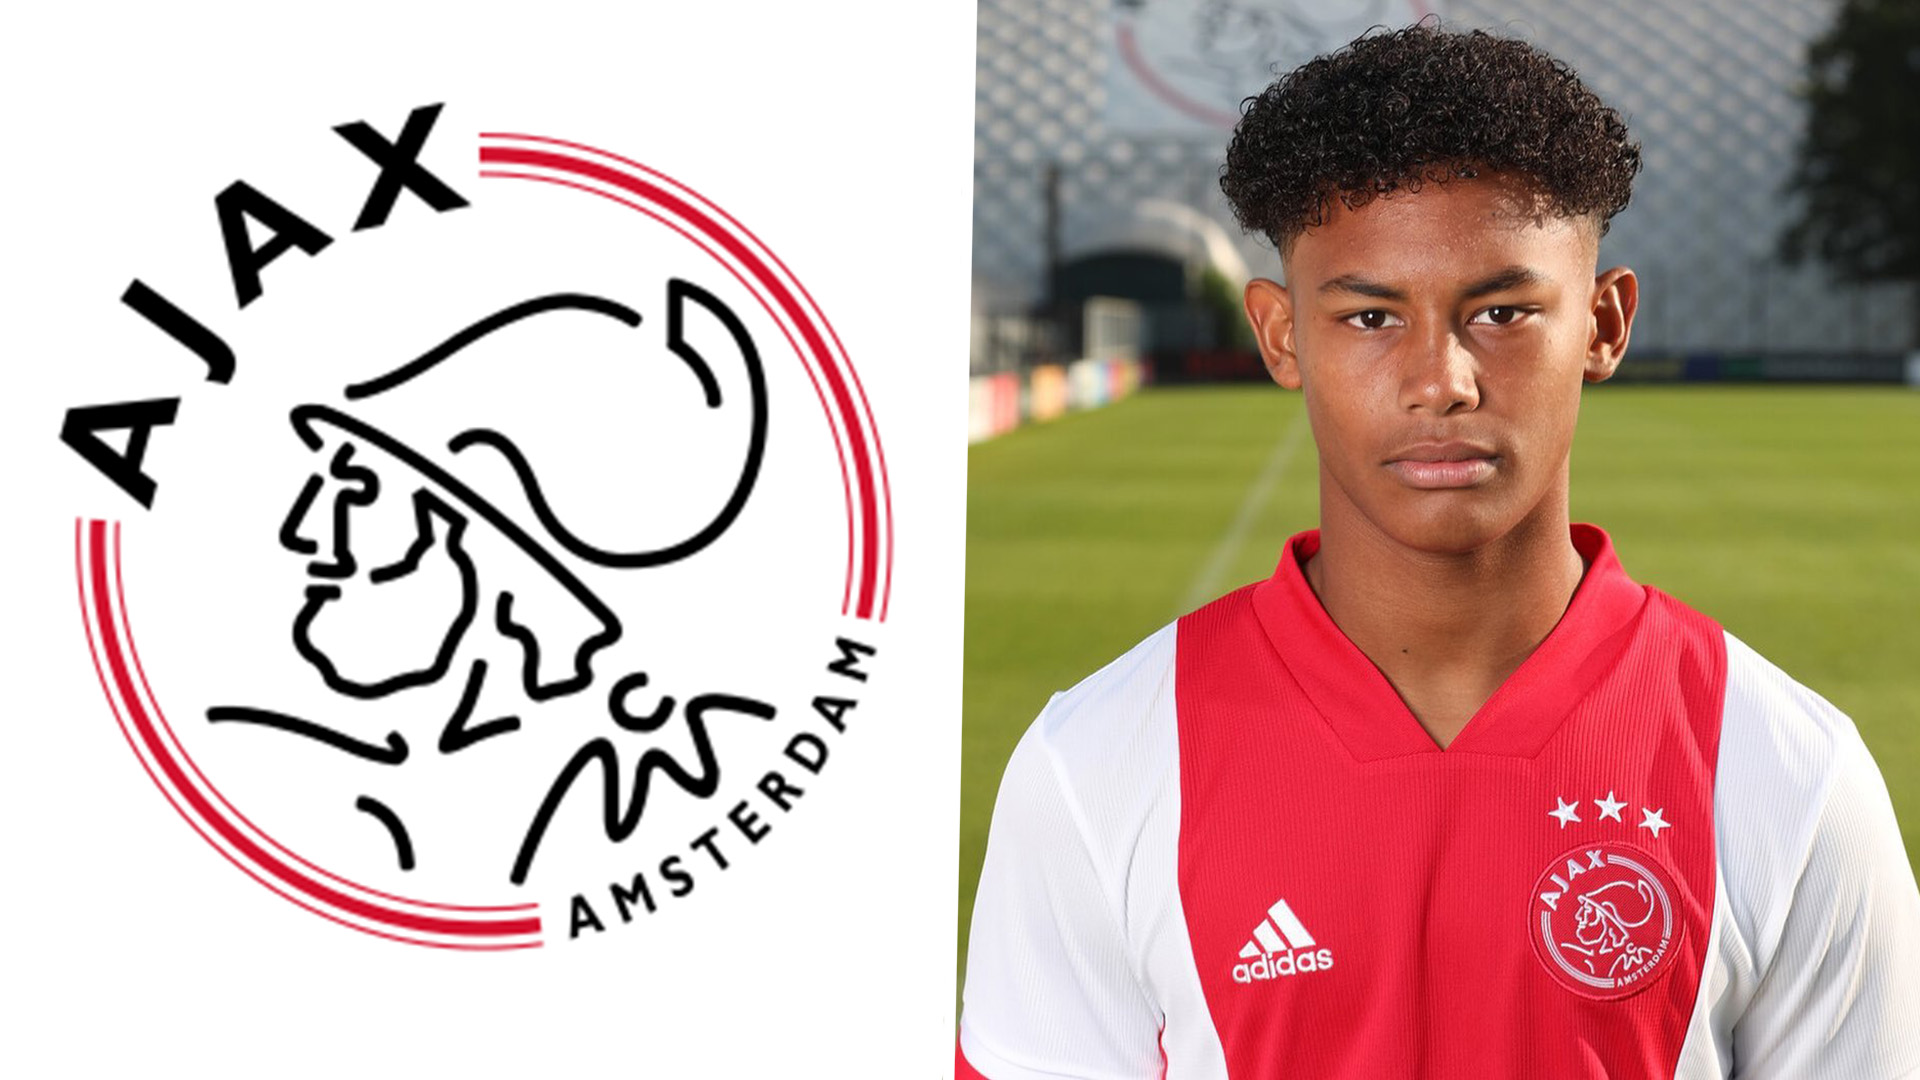 Ajax youth talent Gesser dies in car accident aged 16